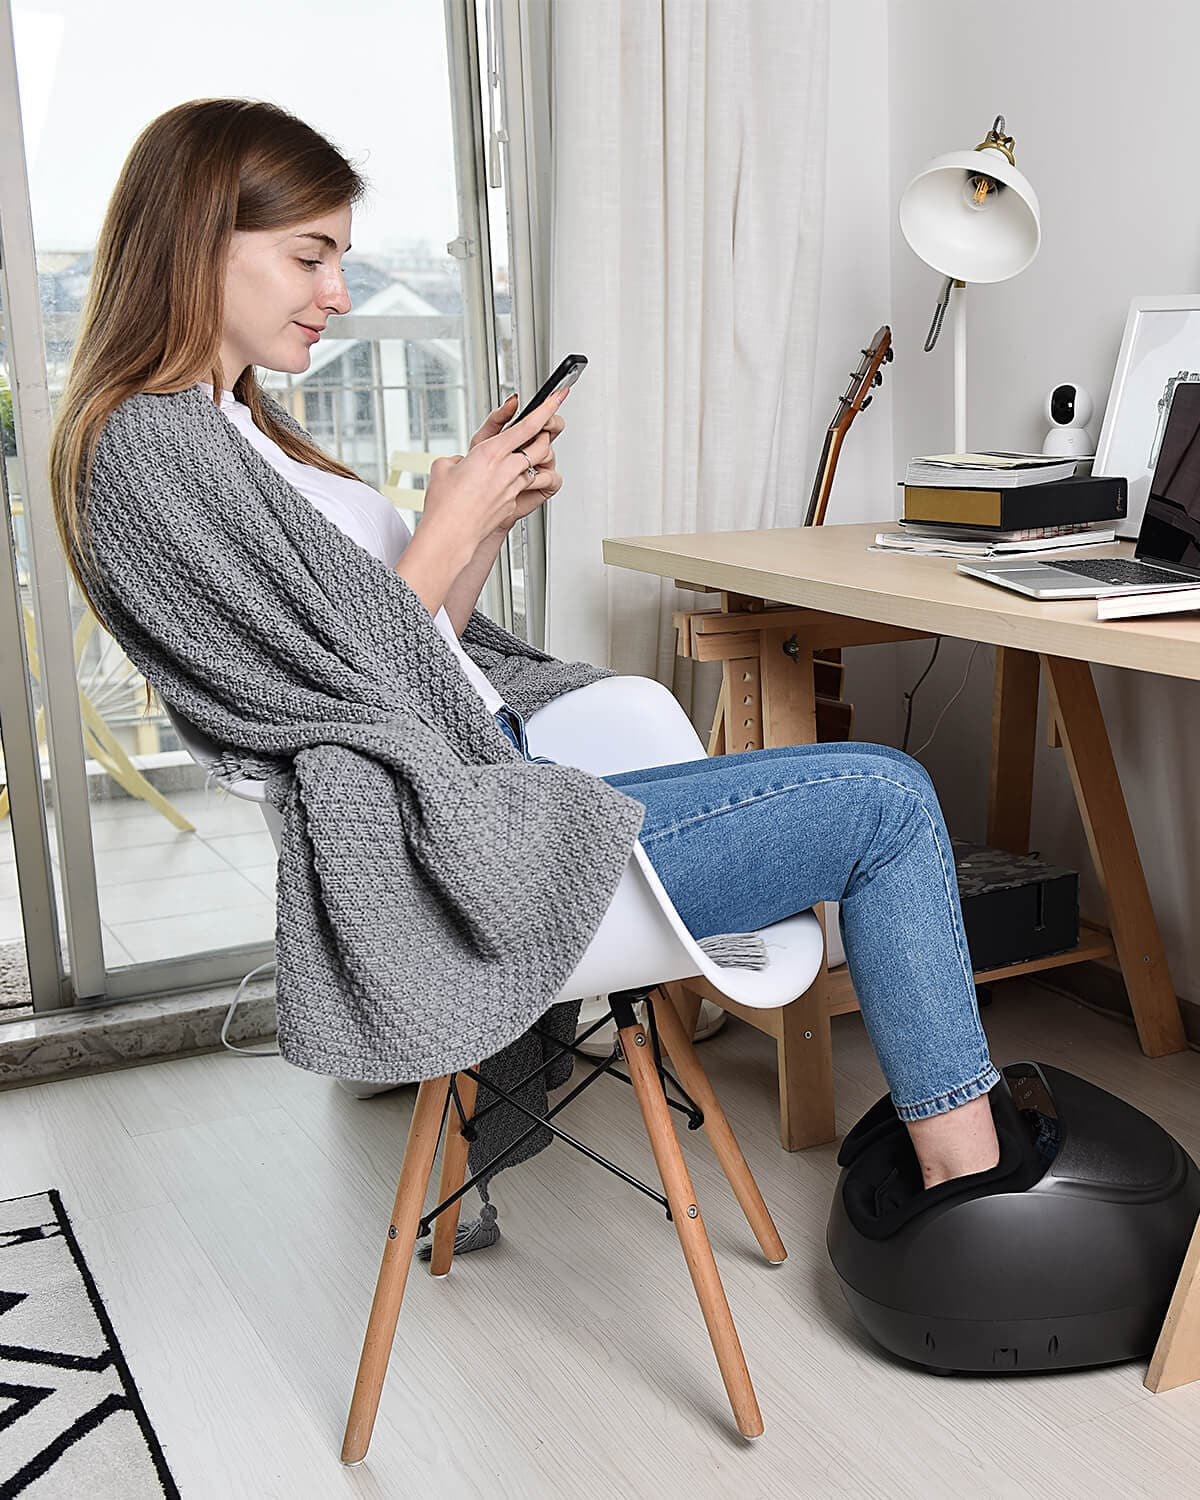 A woman sits on a white chair by a wooden desk, absorbed in her smartphone. Draped in a grey knit shawl over a white top and blue jeans, her feet enjoy the deep kneading of a Renpho EU Shiatsu Foot Massager Premium. The desk holds a laptop, books, and lamp, while a guitar rests against the wall. The room has modern décor.